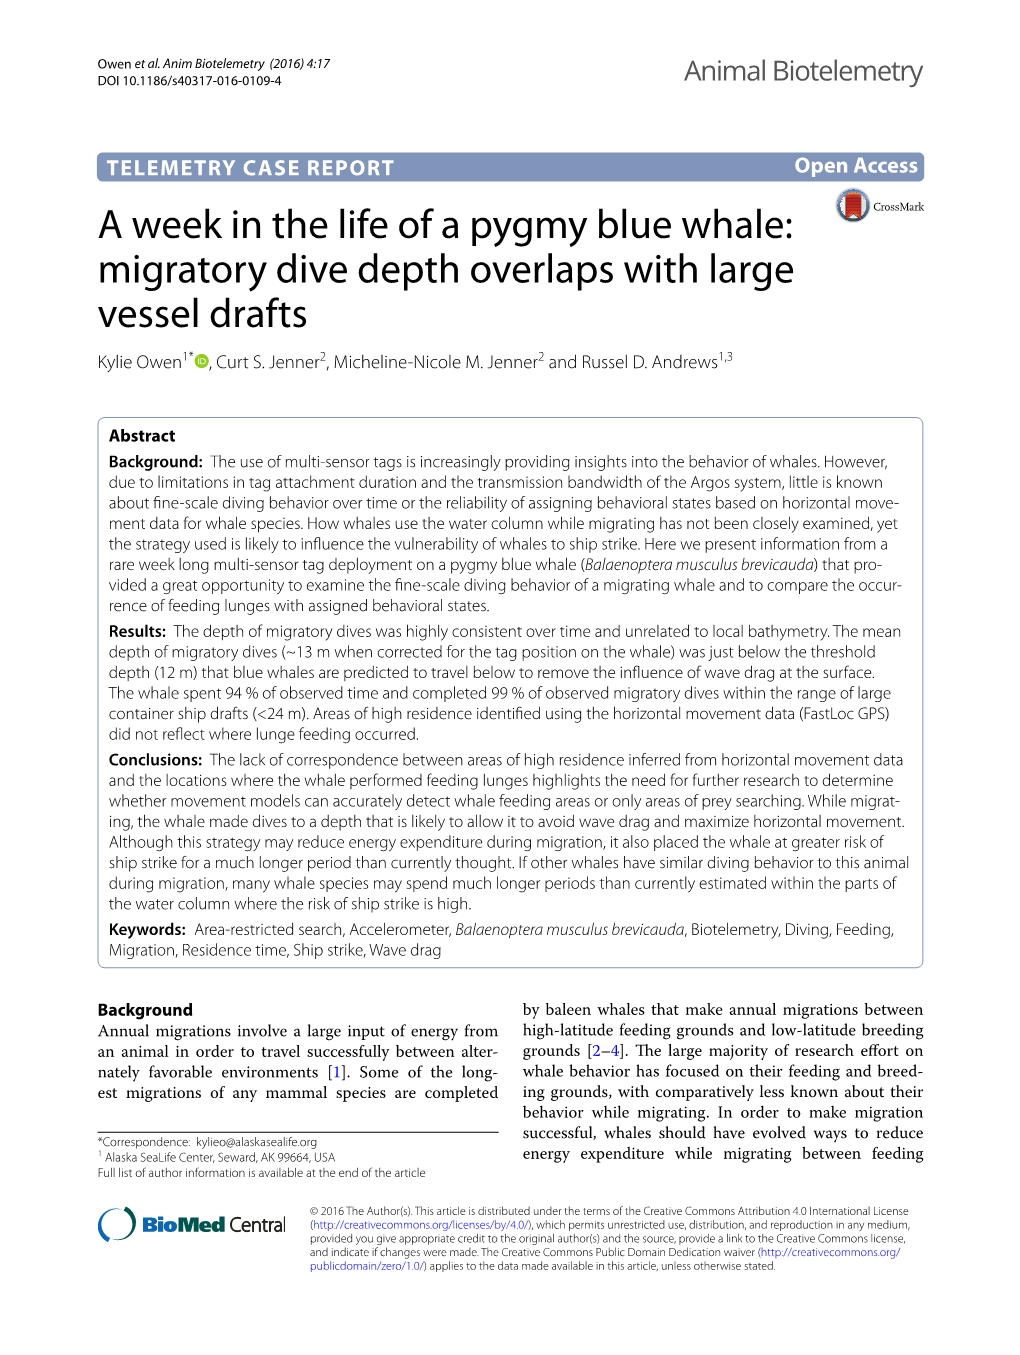 A Week in the Life of a Pygmy Blue Whale: Migratory Dive Depth Overlaps with Large Vessel Drafts Kylie Owen1* , Curt S